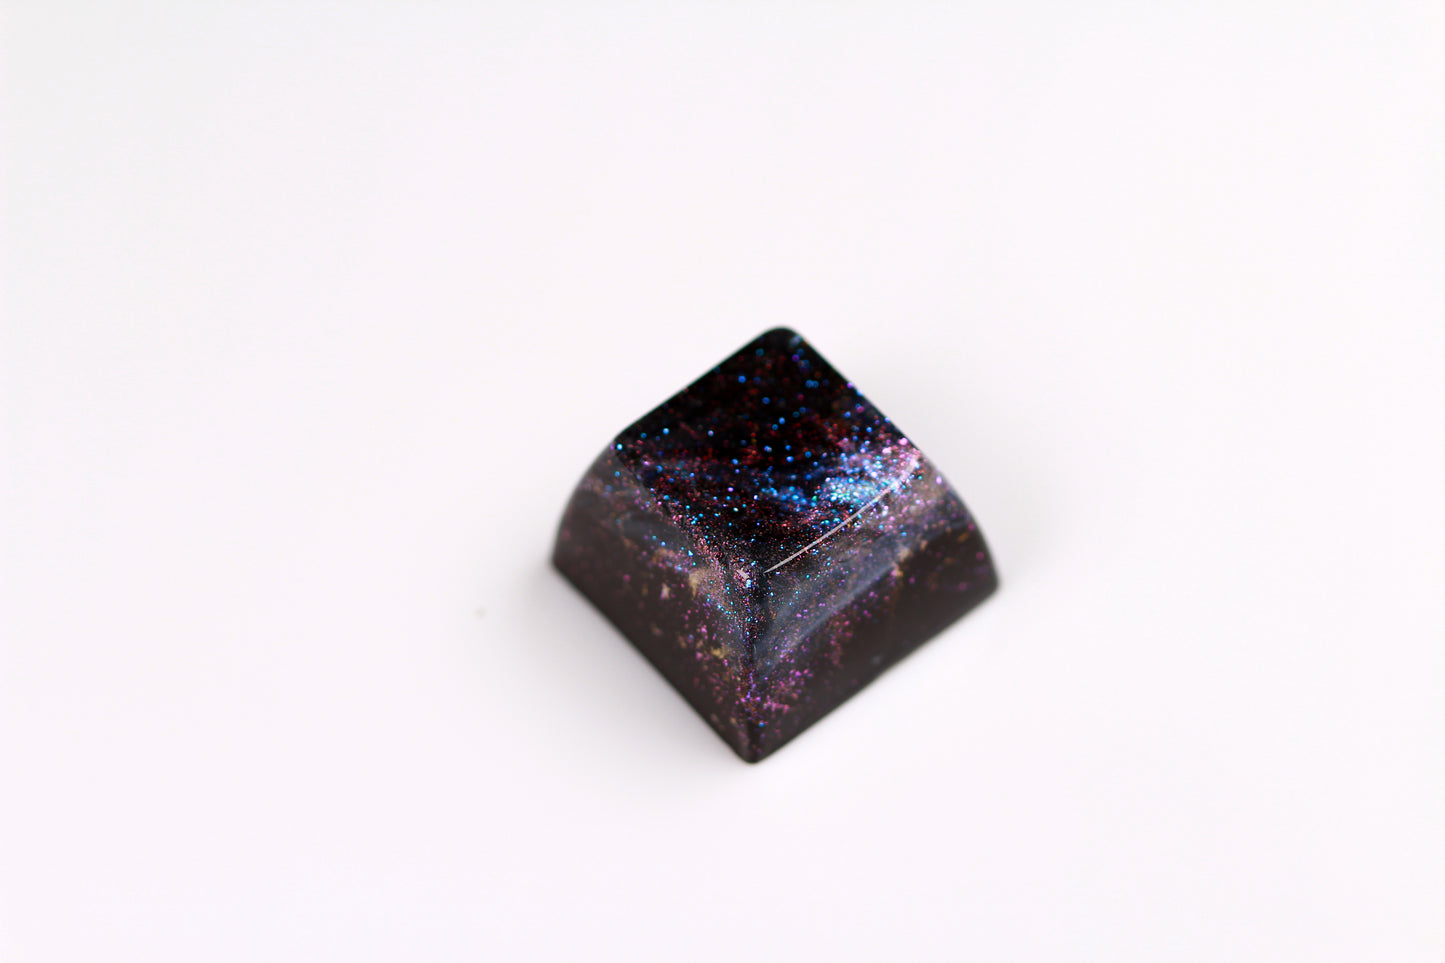 Gimpy SA Row 3 - Deep Field Particle Stream 3 - PrimeCaps Keycap - Blank and Sculpted Artisan Keycaps for cherry MX mechanical keyboards 